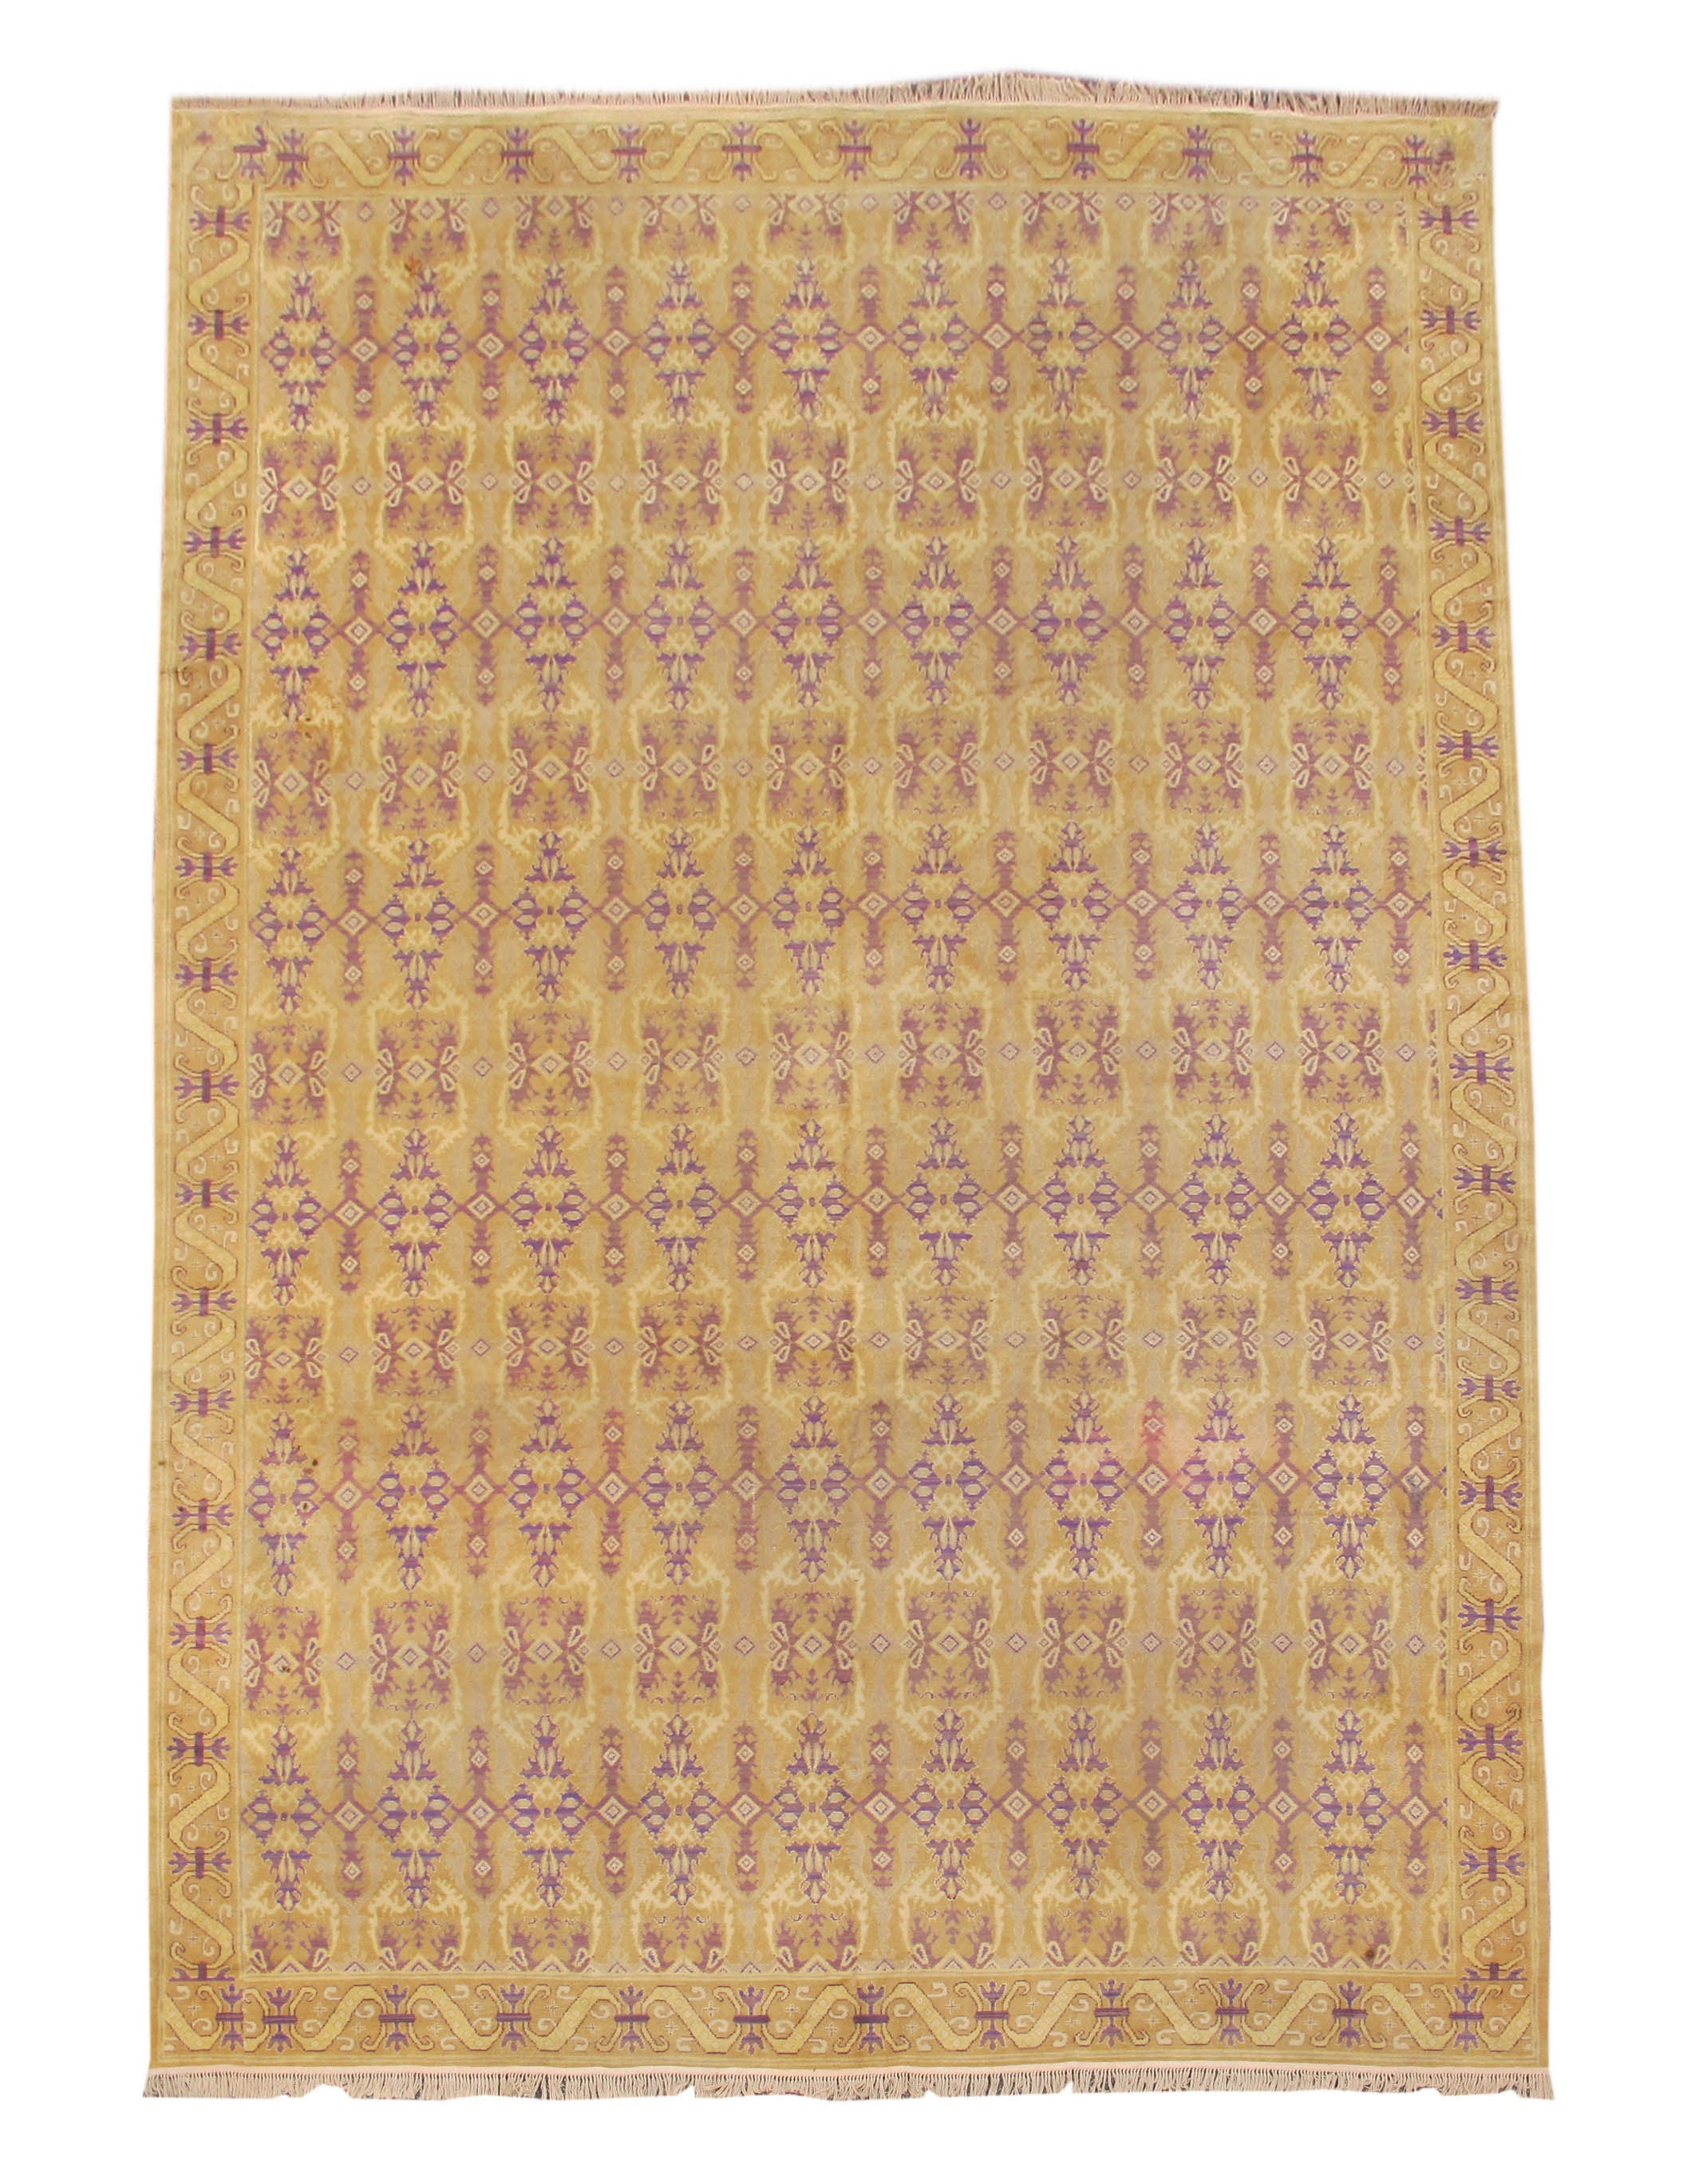 Early 20th Century Gold Colored Spanish Carpet with Voilet Patterns